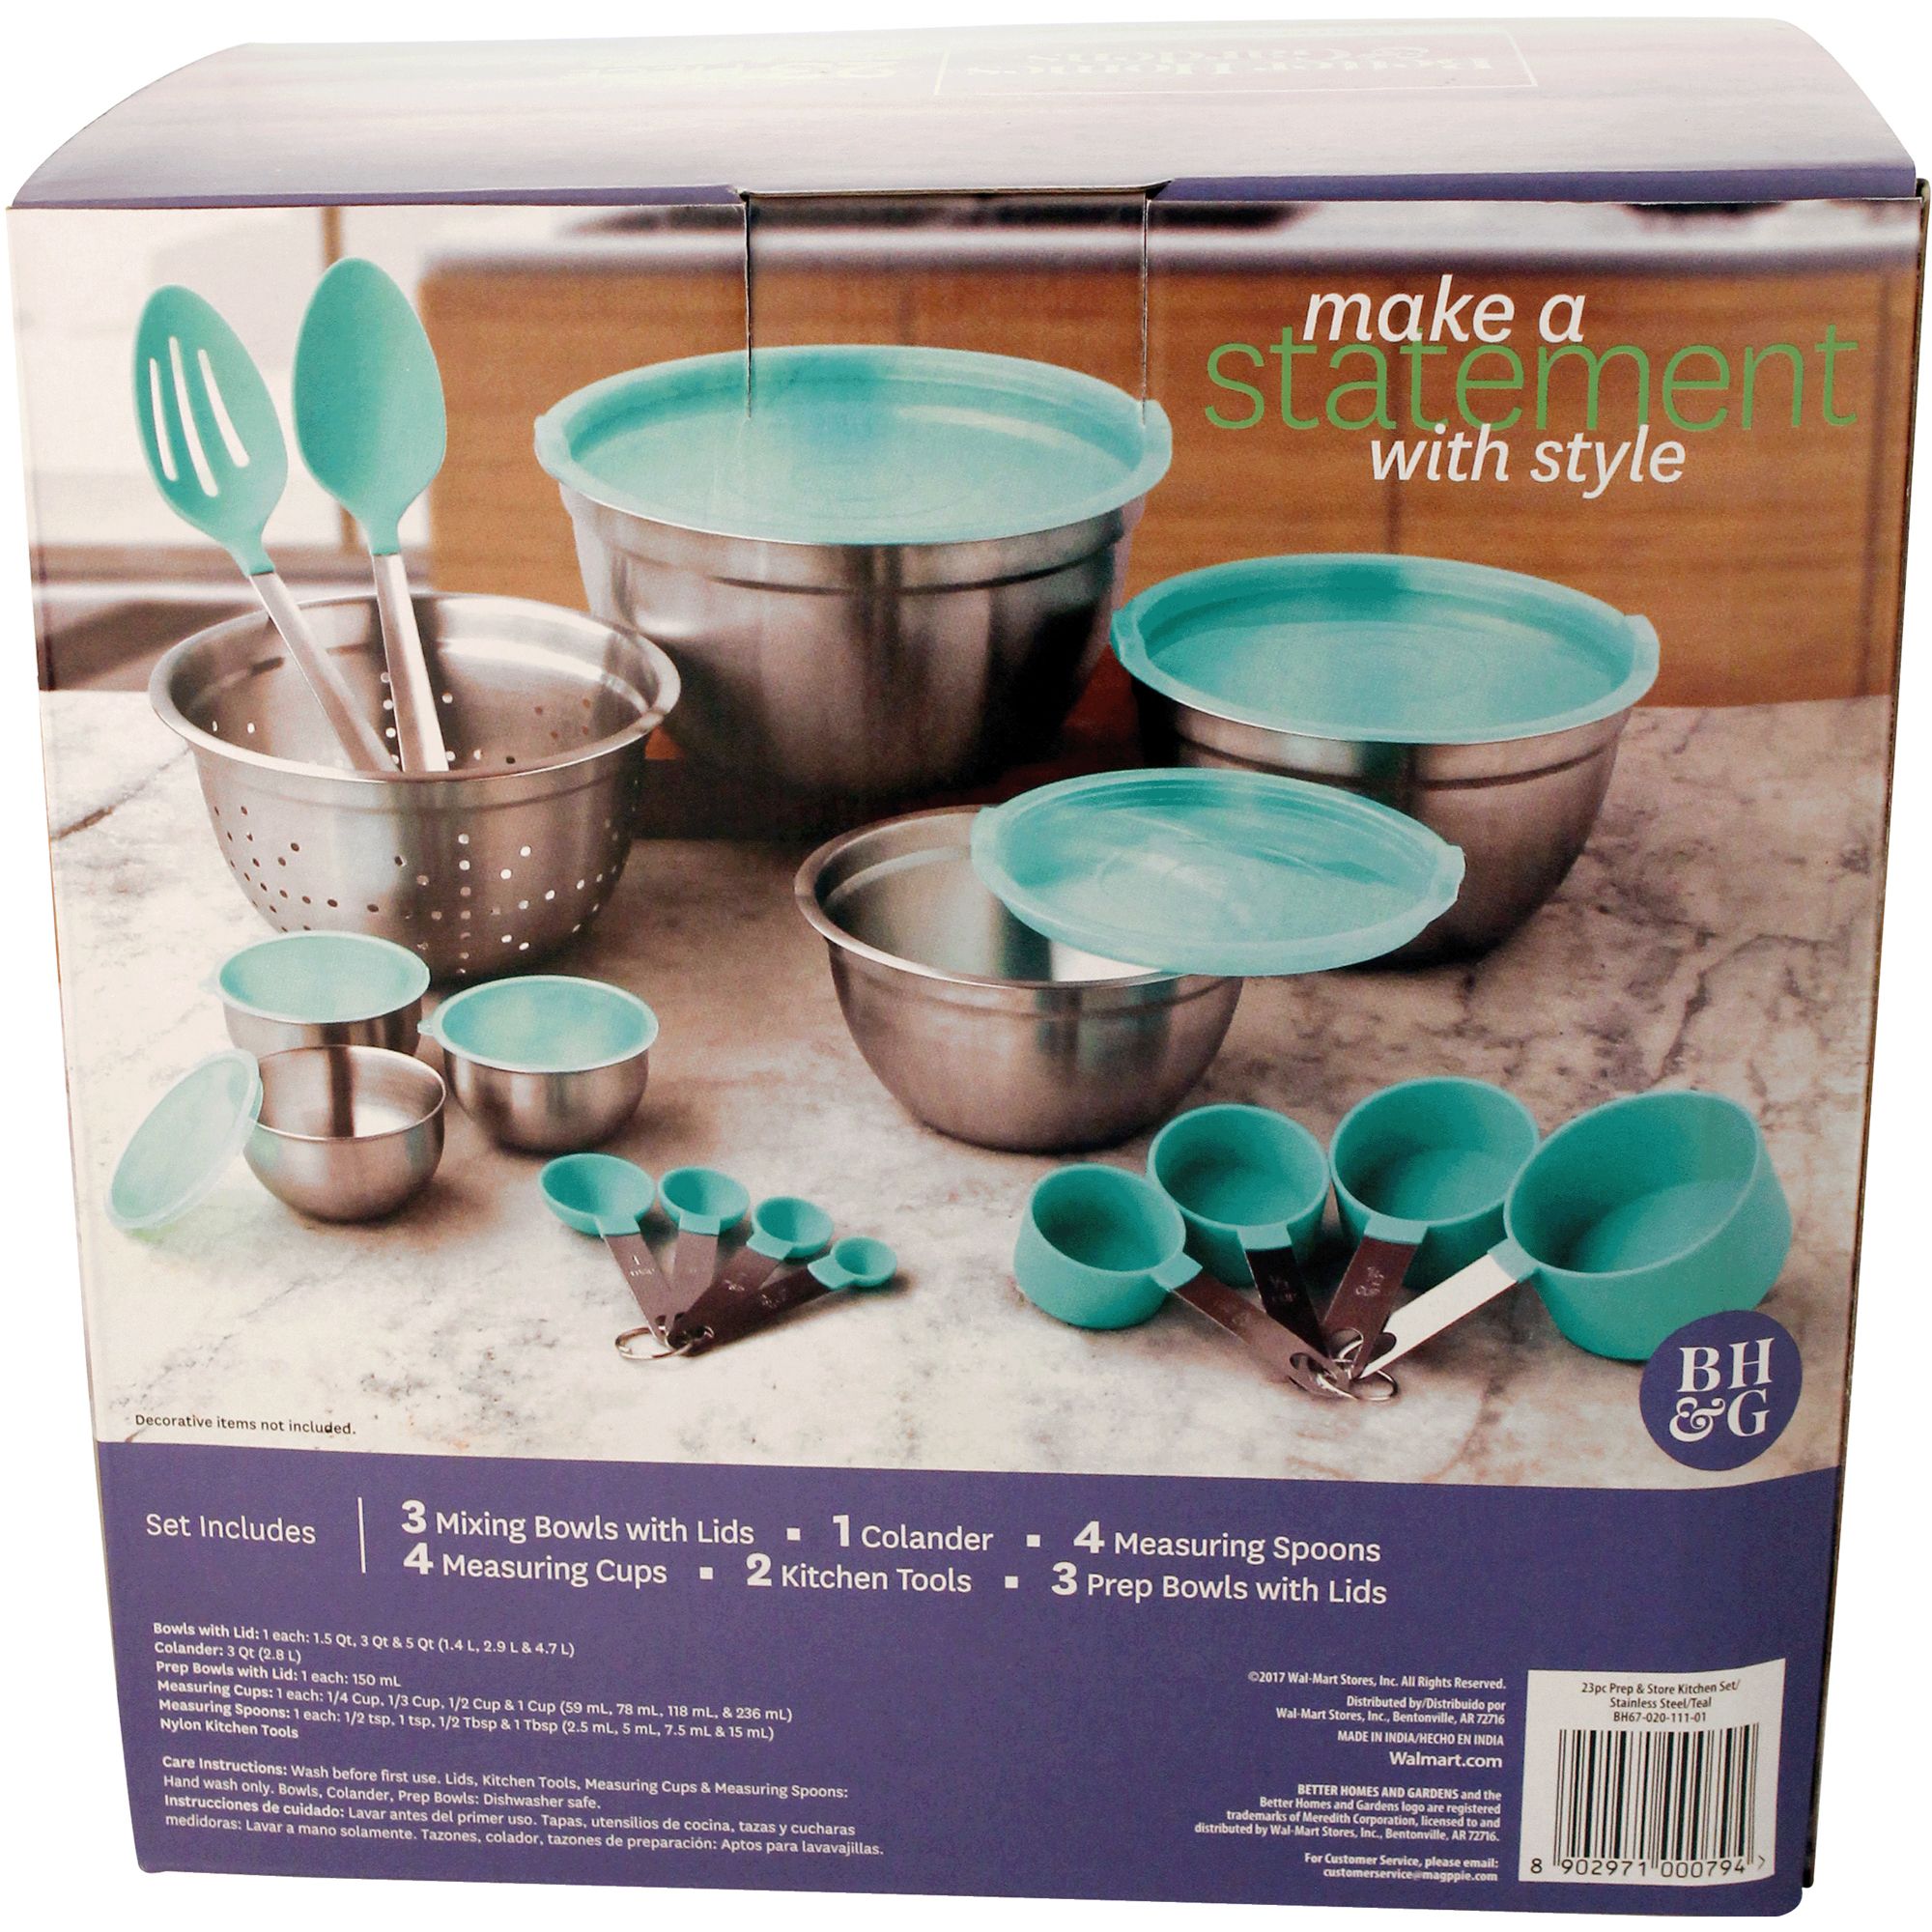 Better Homes & Gardens Teal Gadget and Utensil Set, 23 Piece - image 5 of 7